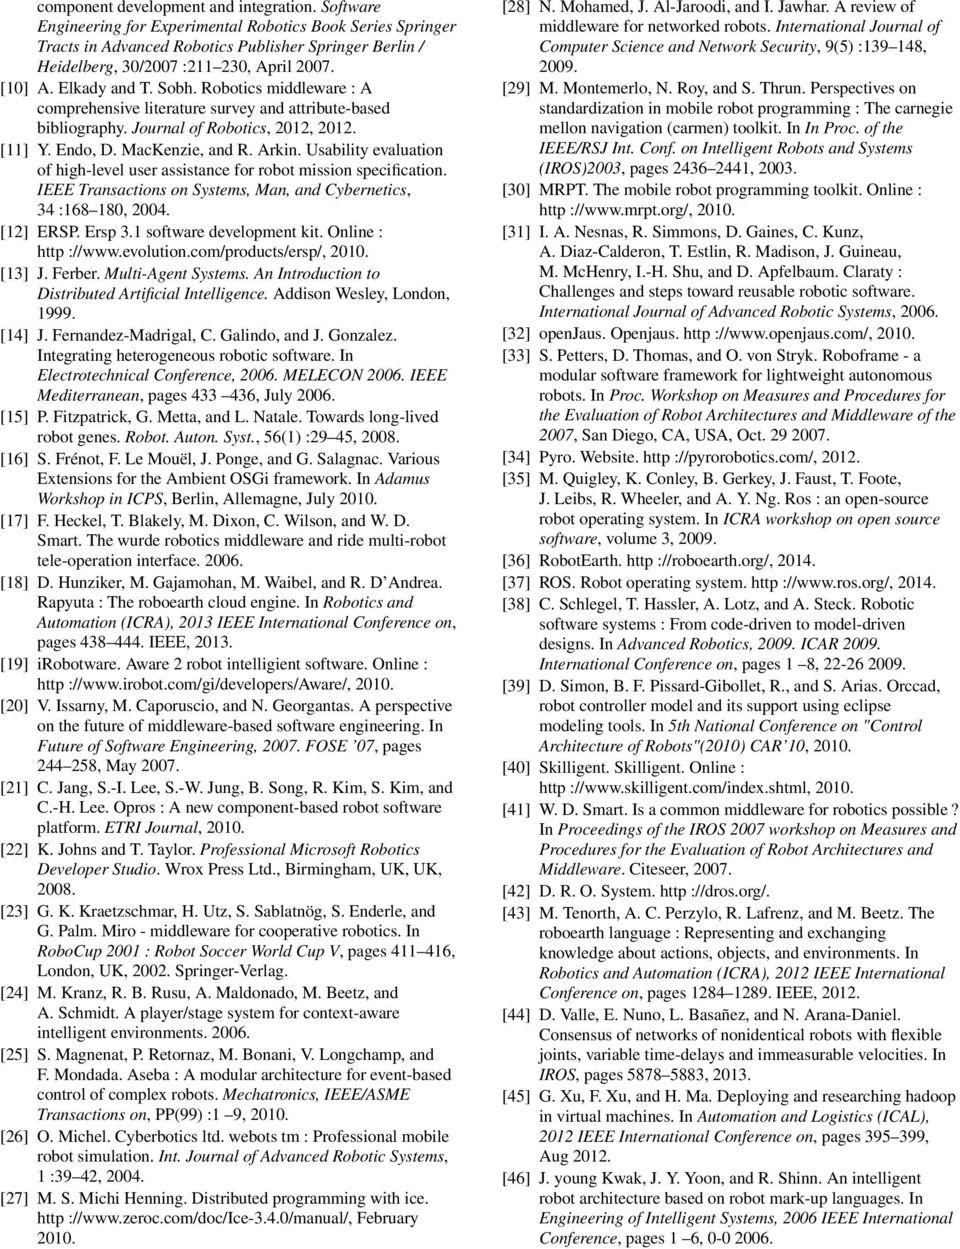 Robotics middleware : A comprehensive literature survey and attribute-based bibliography. Journal of Robotics, 2012, 2012. [11] Y. Endo, D. MacKenzie, and R. Arkin.